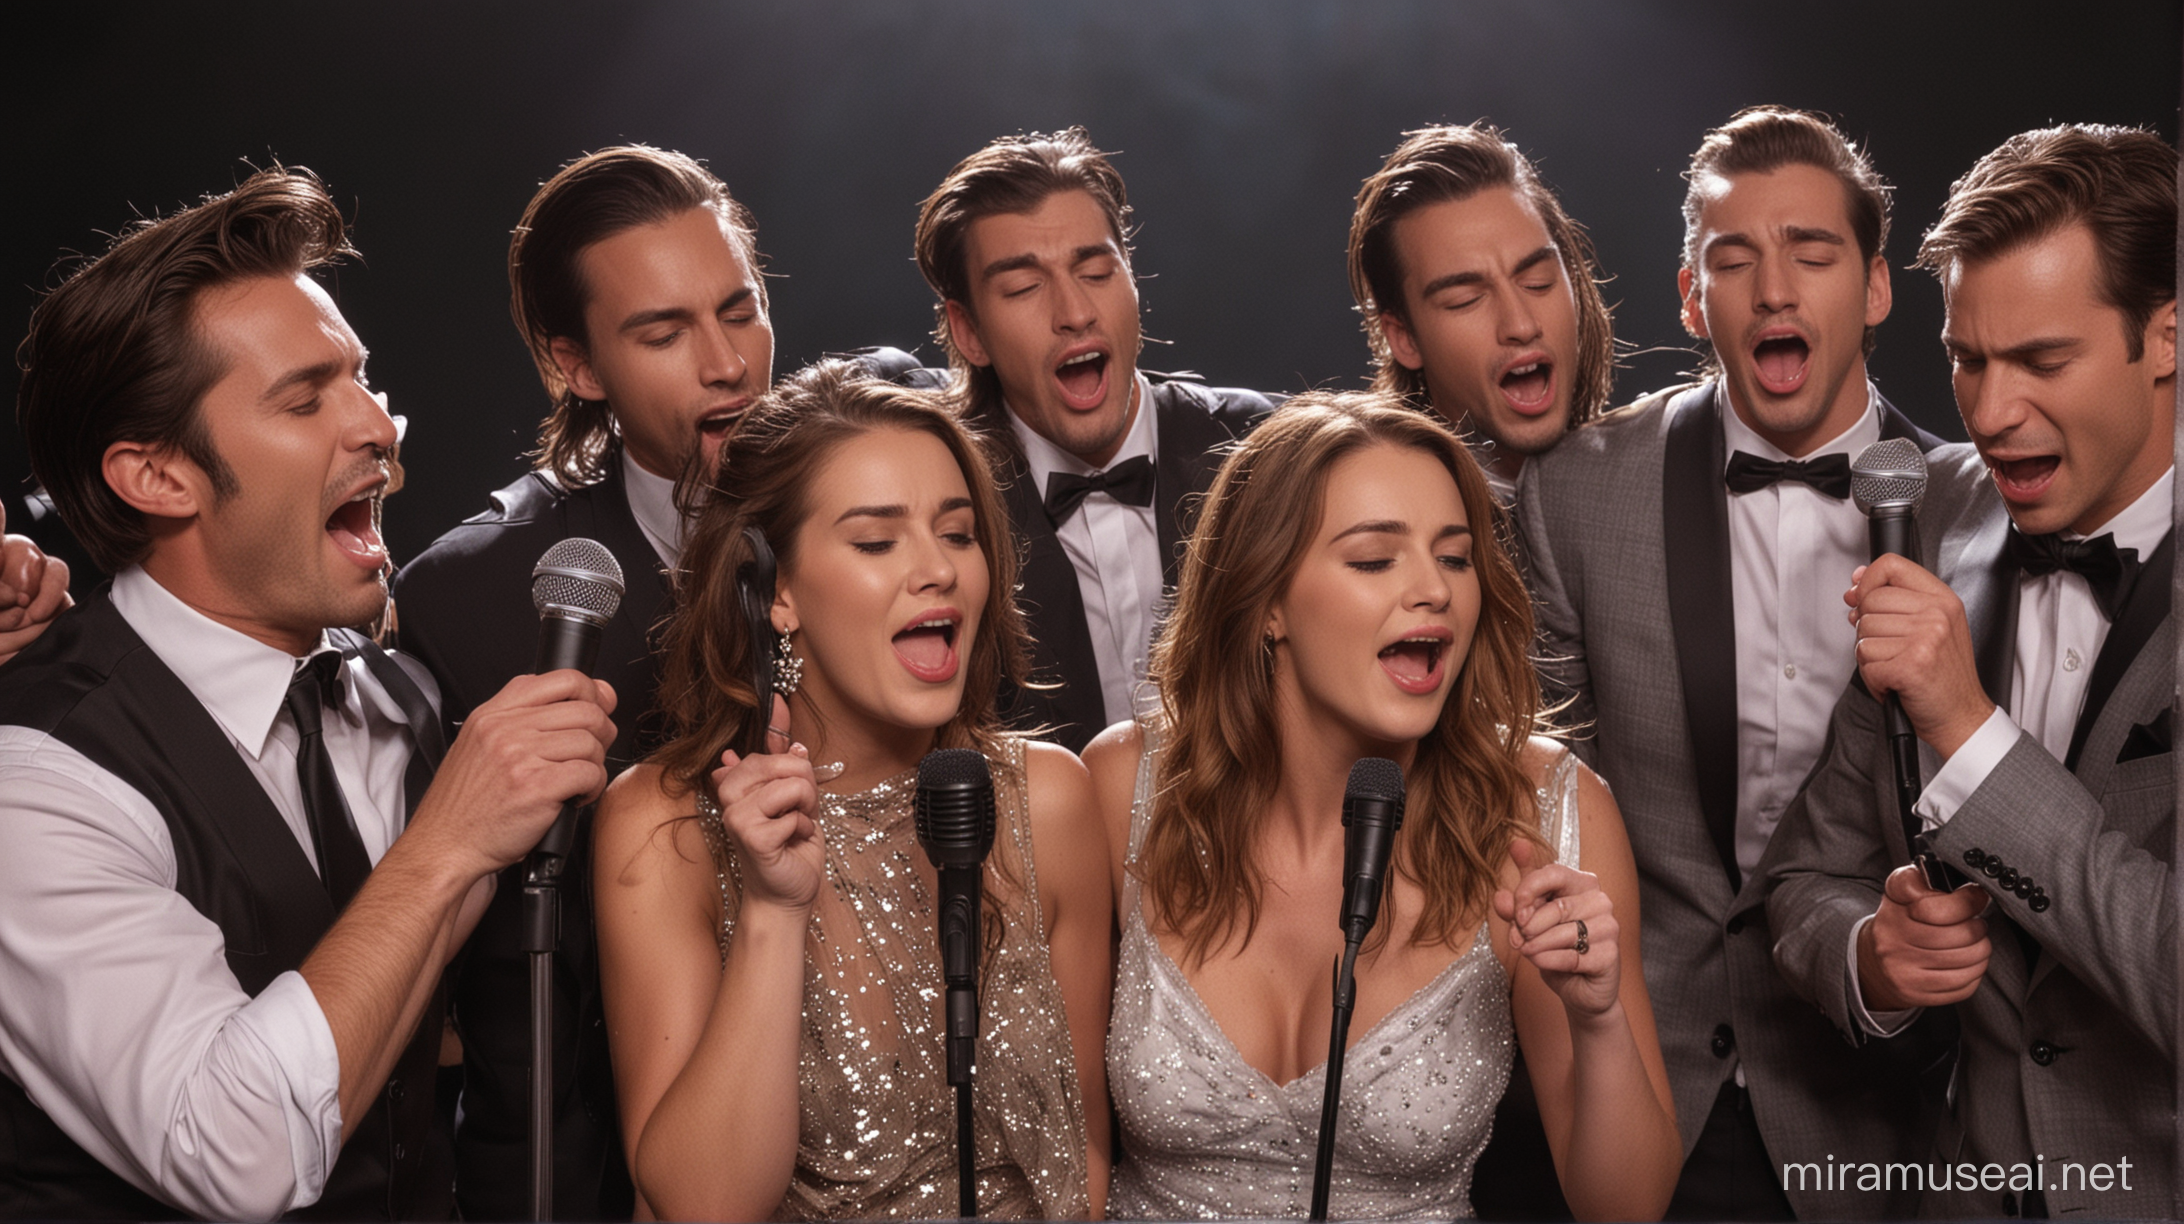 Diverse Group Singing Together with Microphone